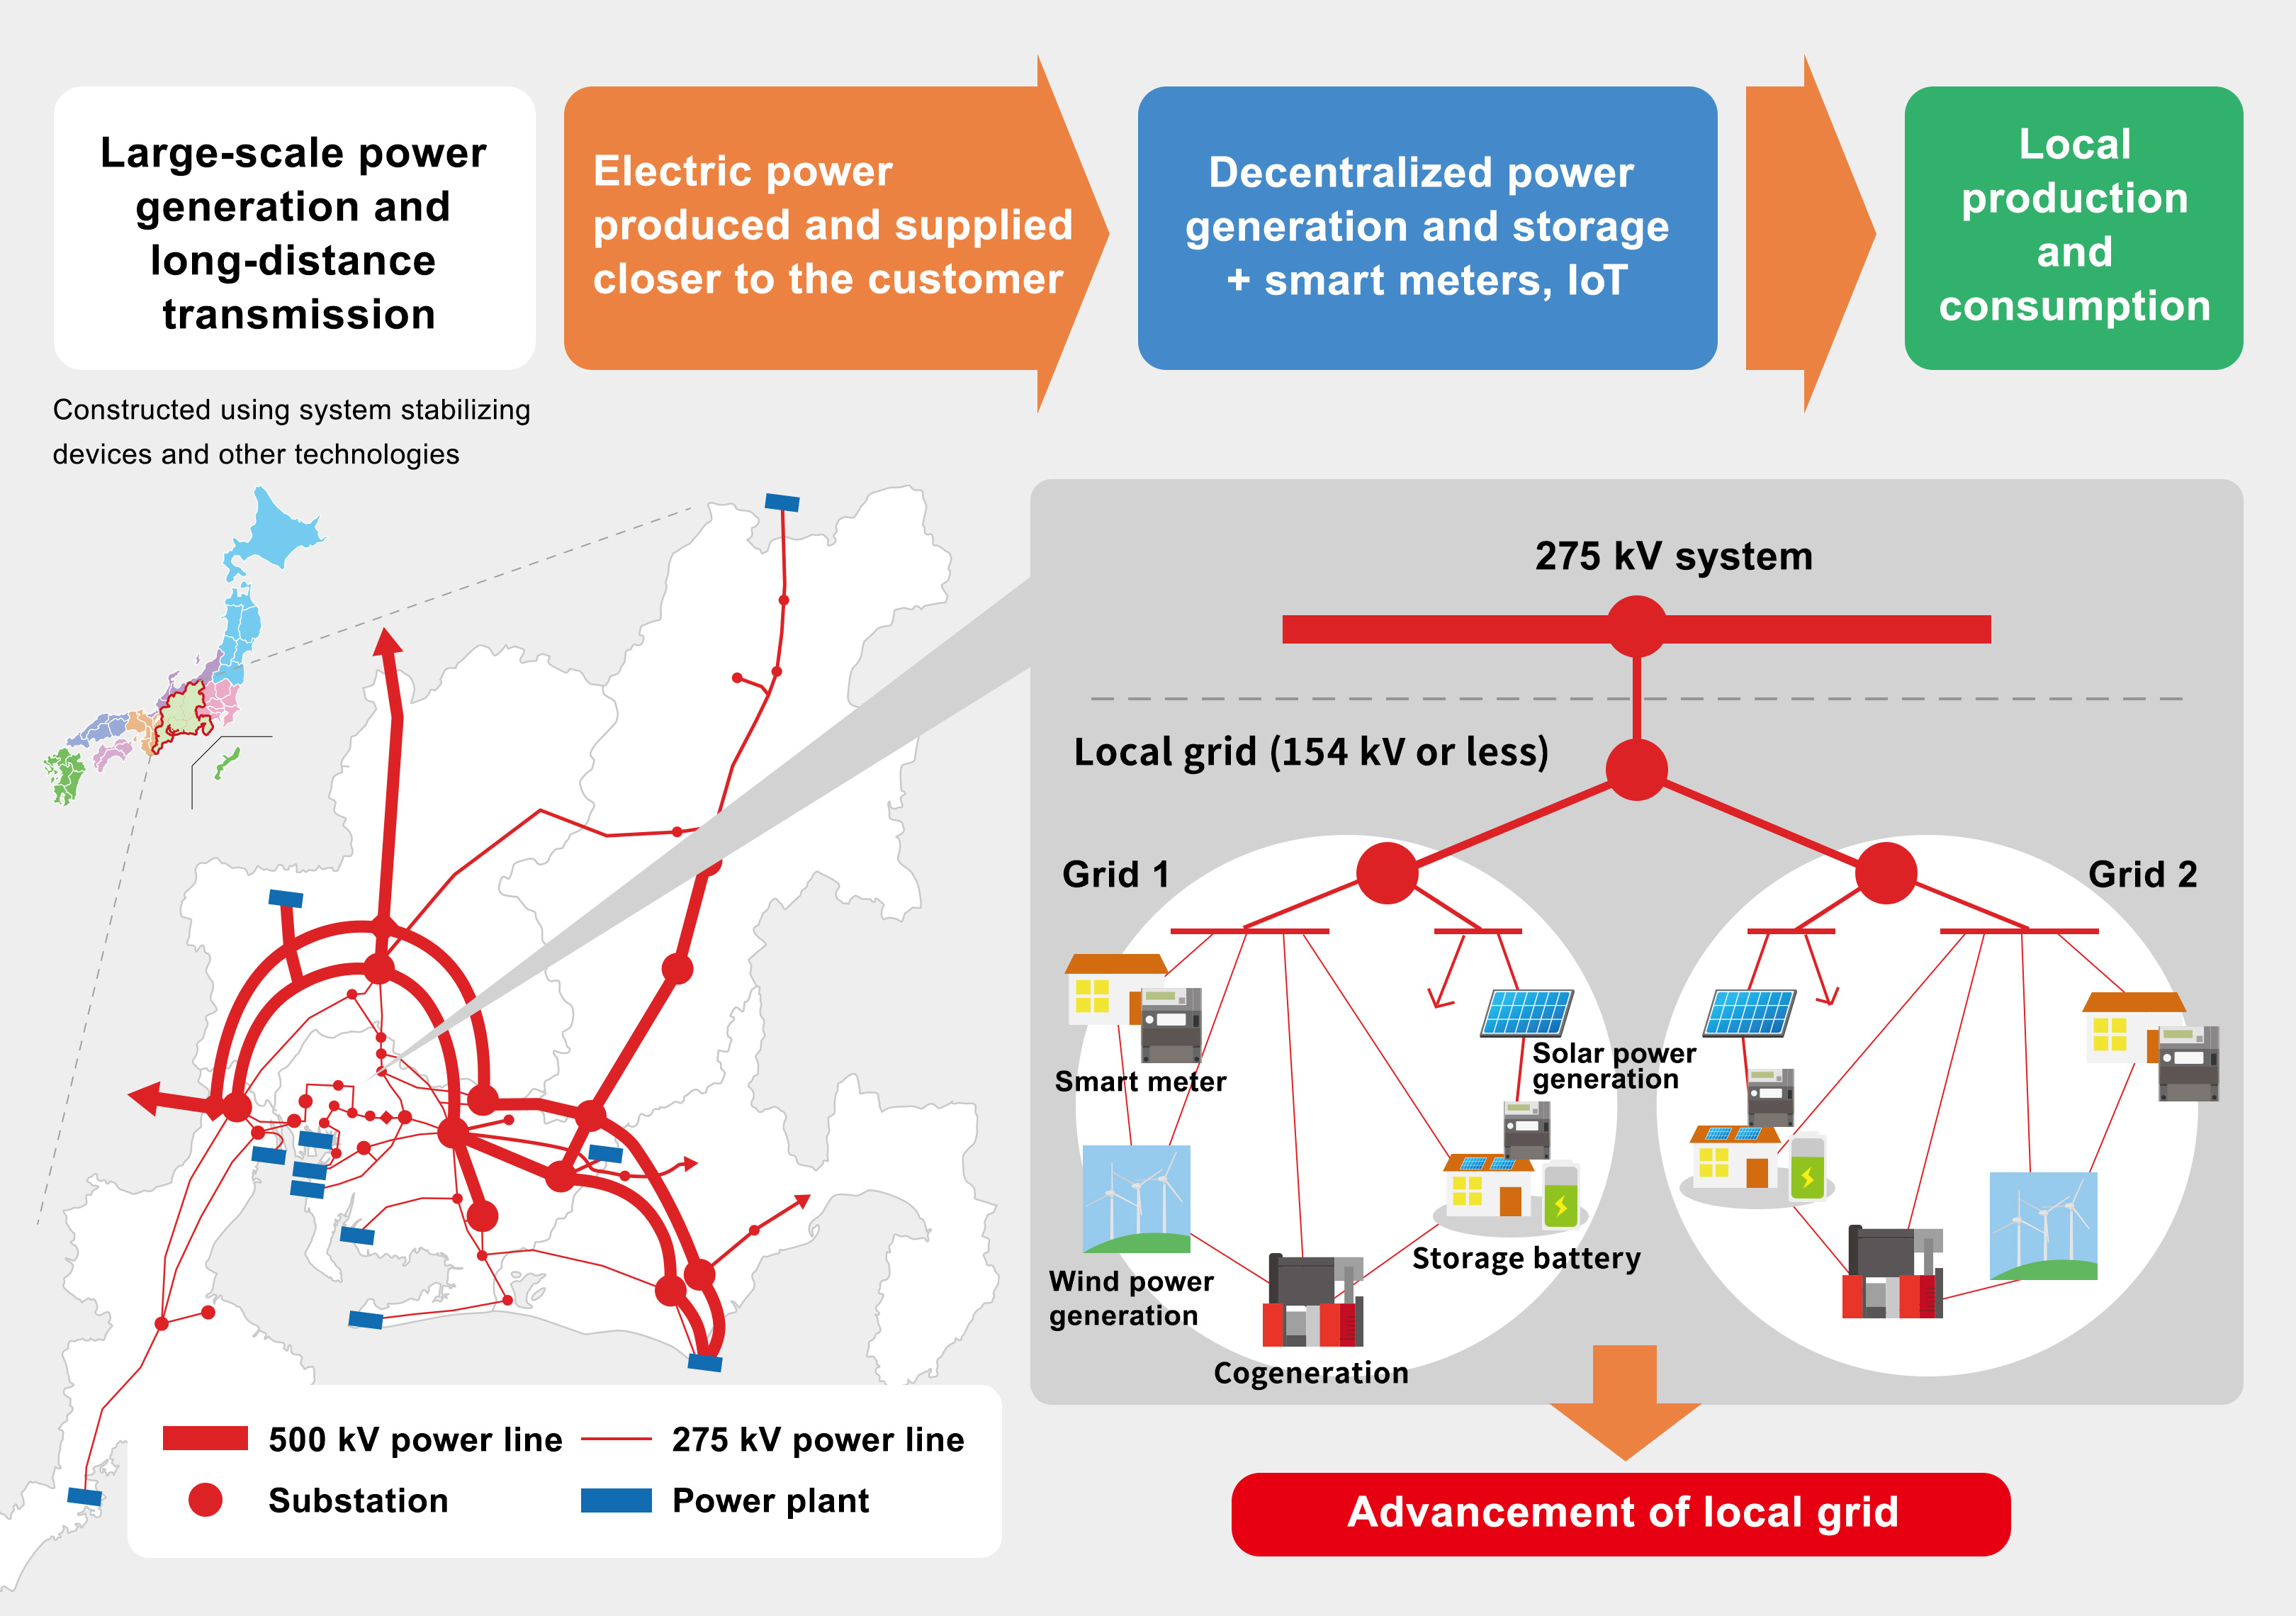 Tomorrow’s Power Grid (More Advanced Local Grids)